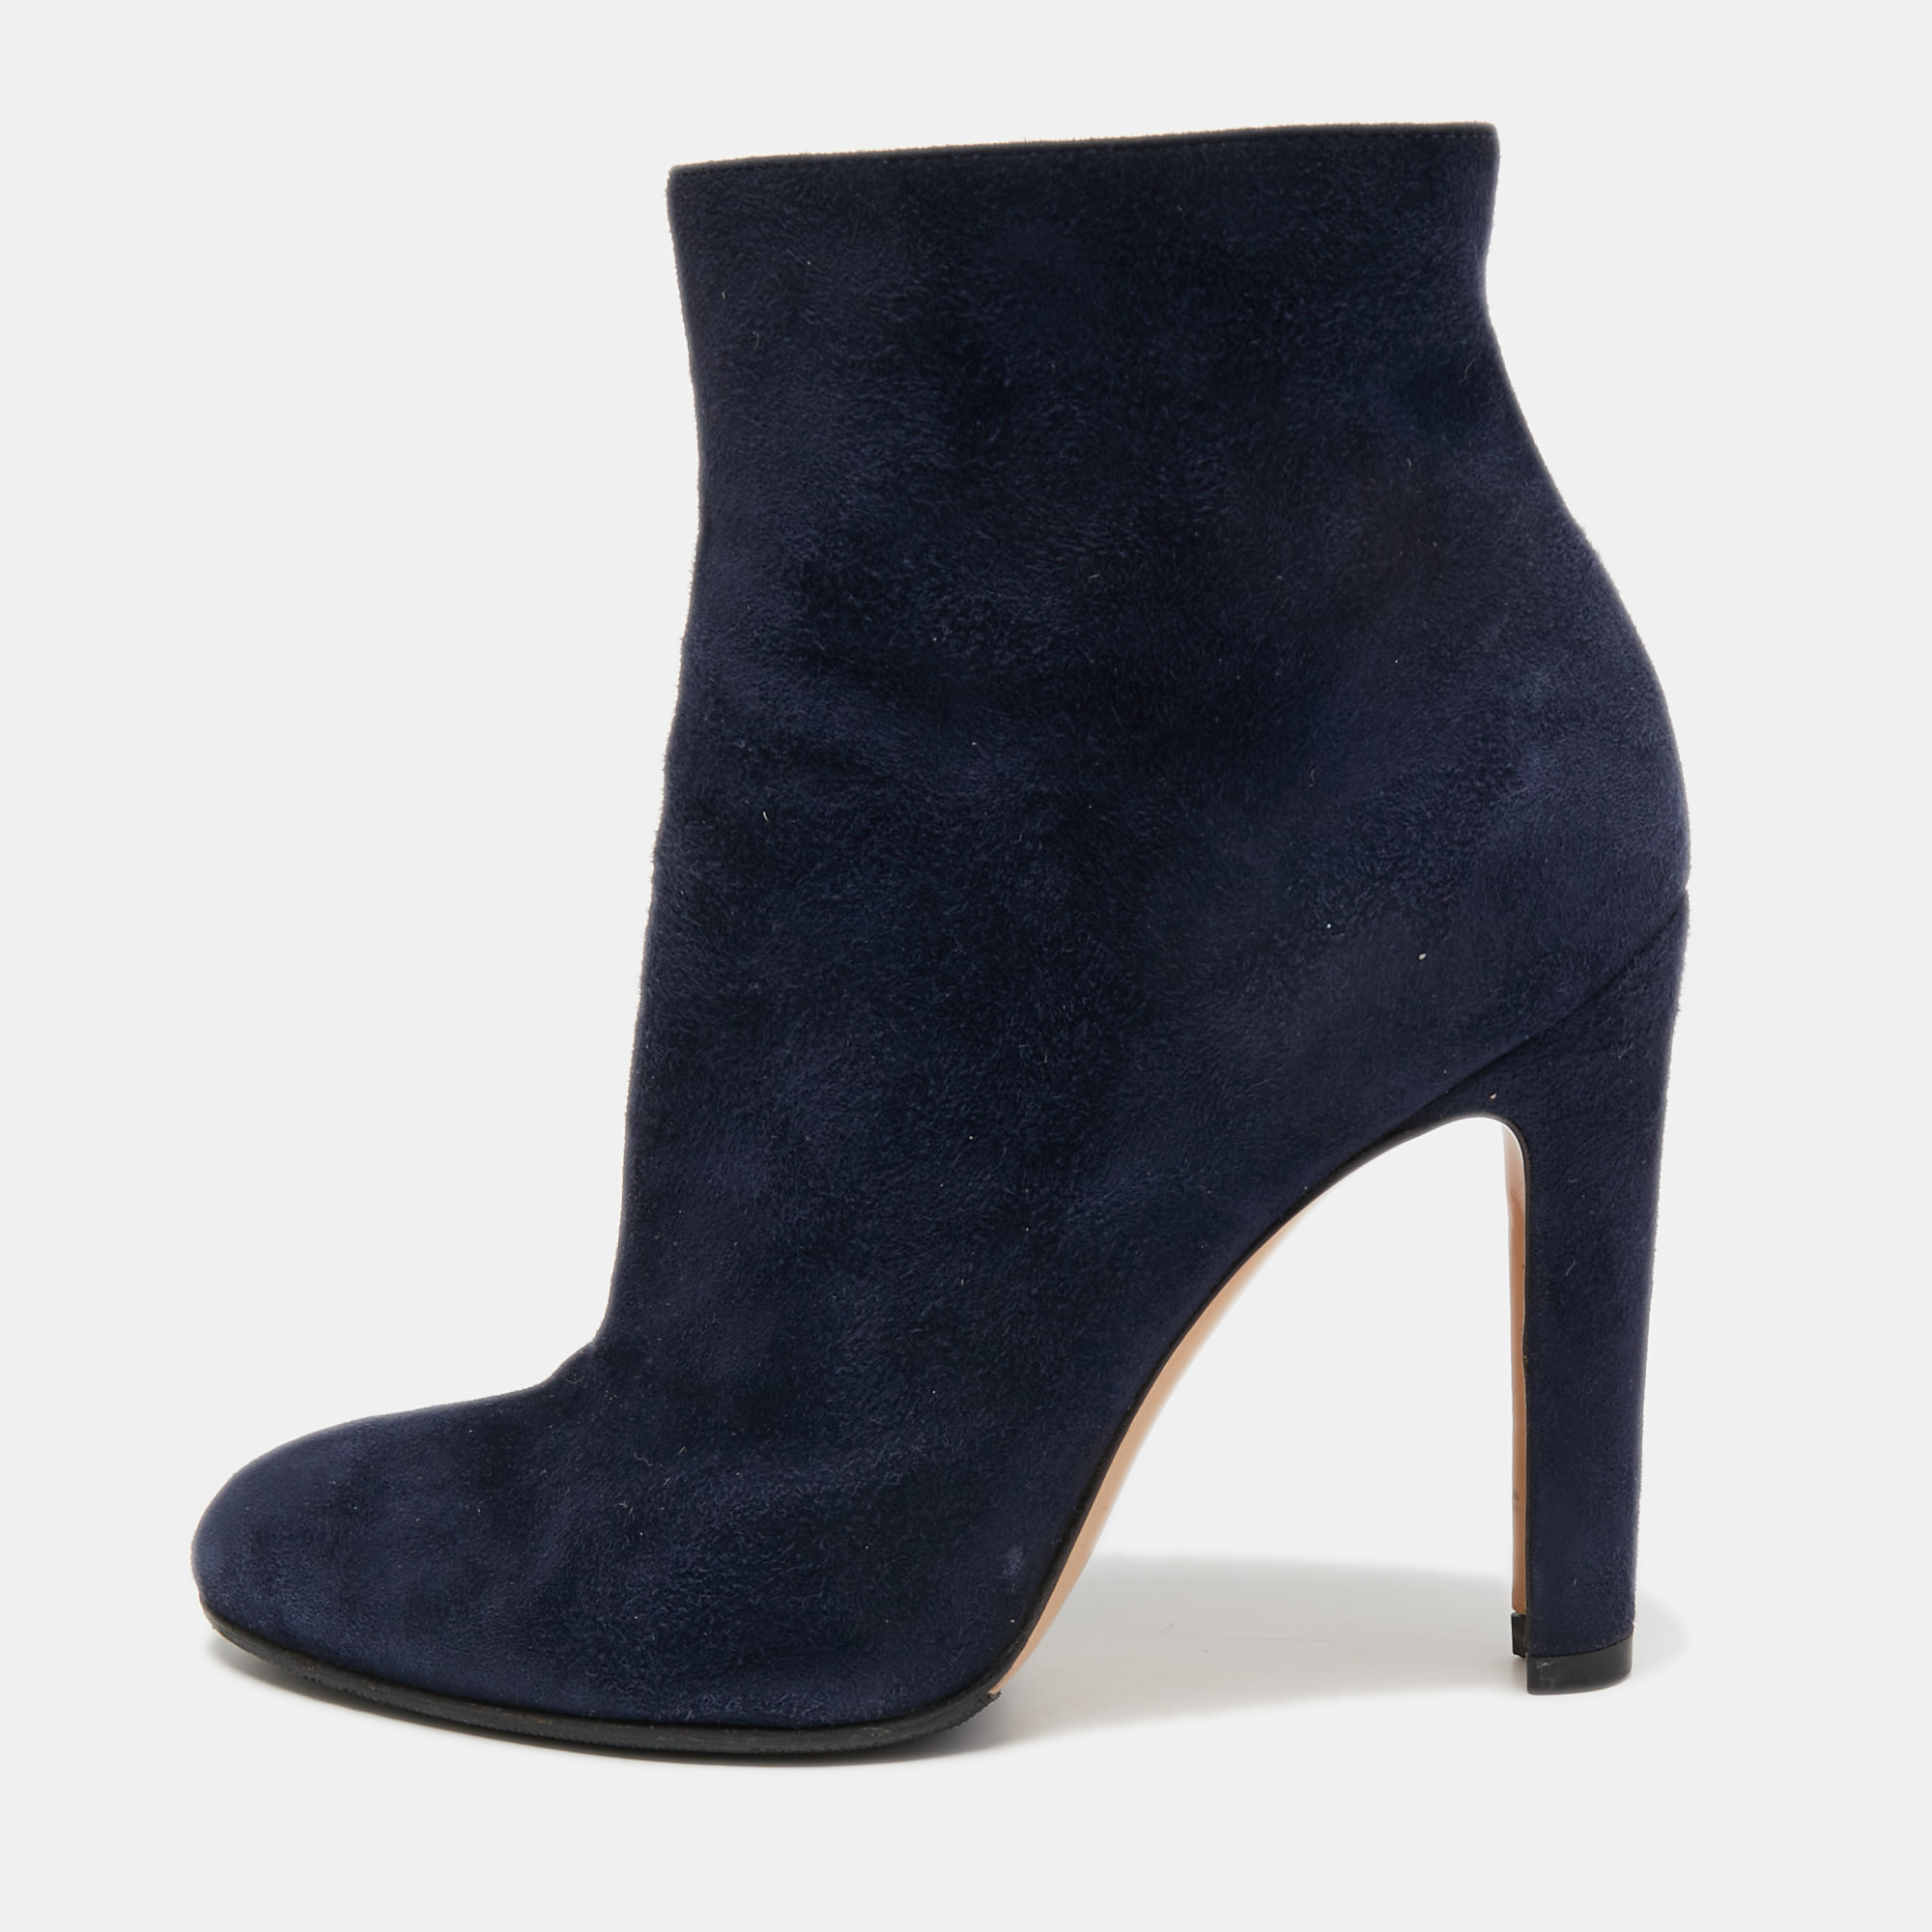 Gianvito rossi navy blue suede ankle booties size 37